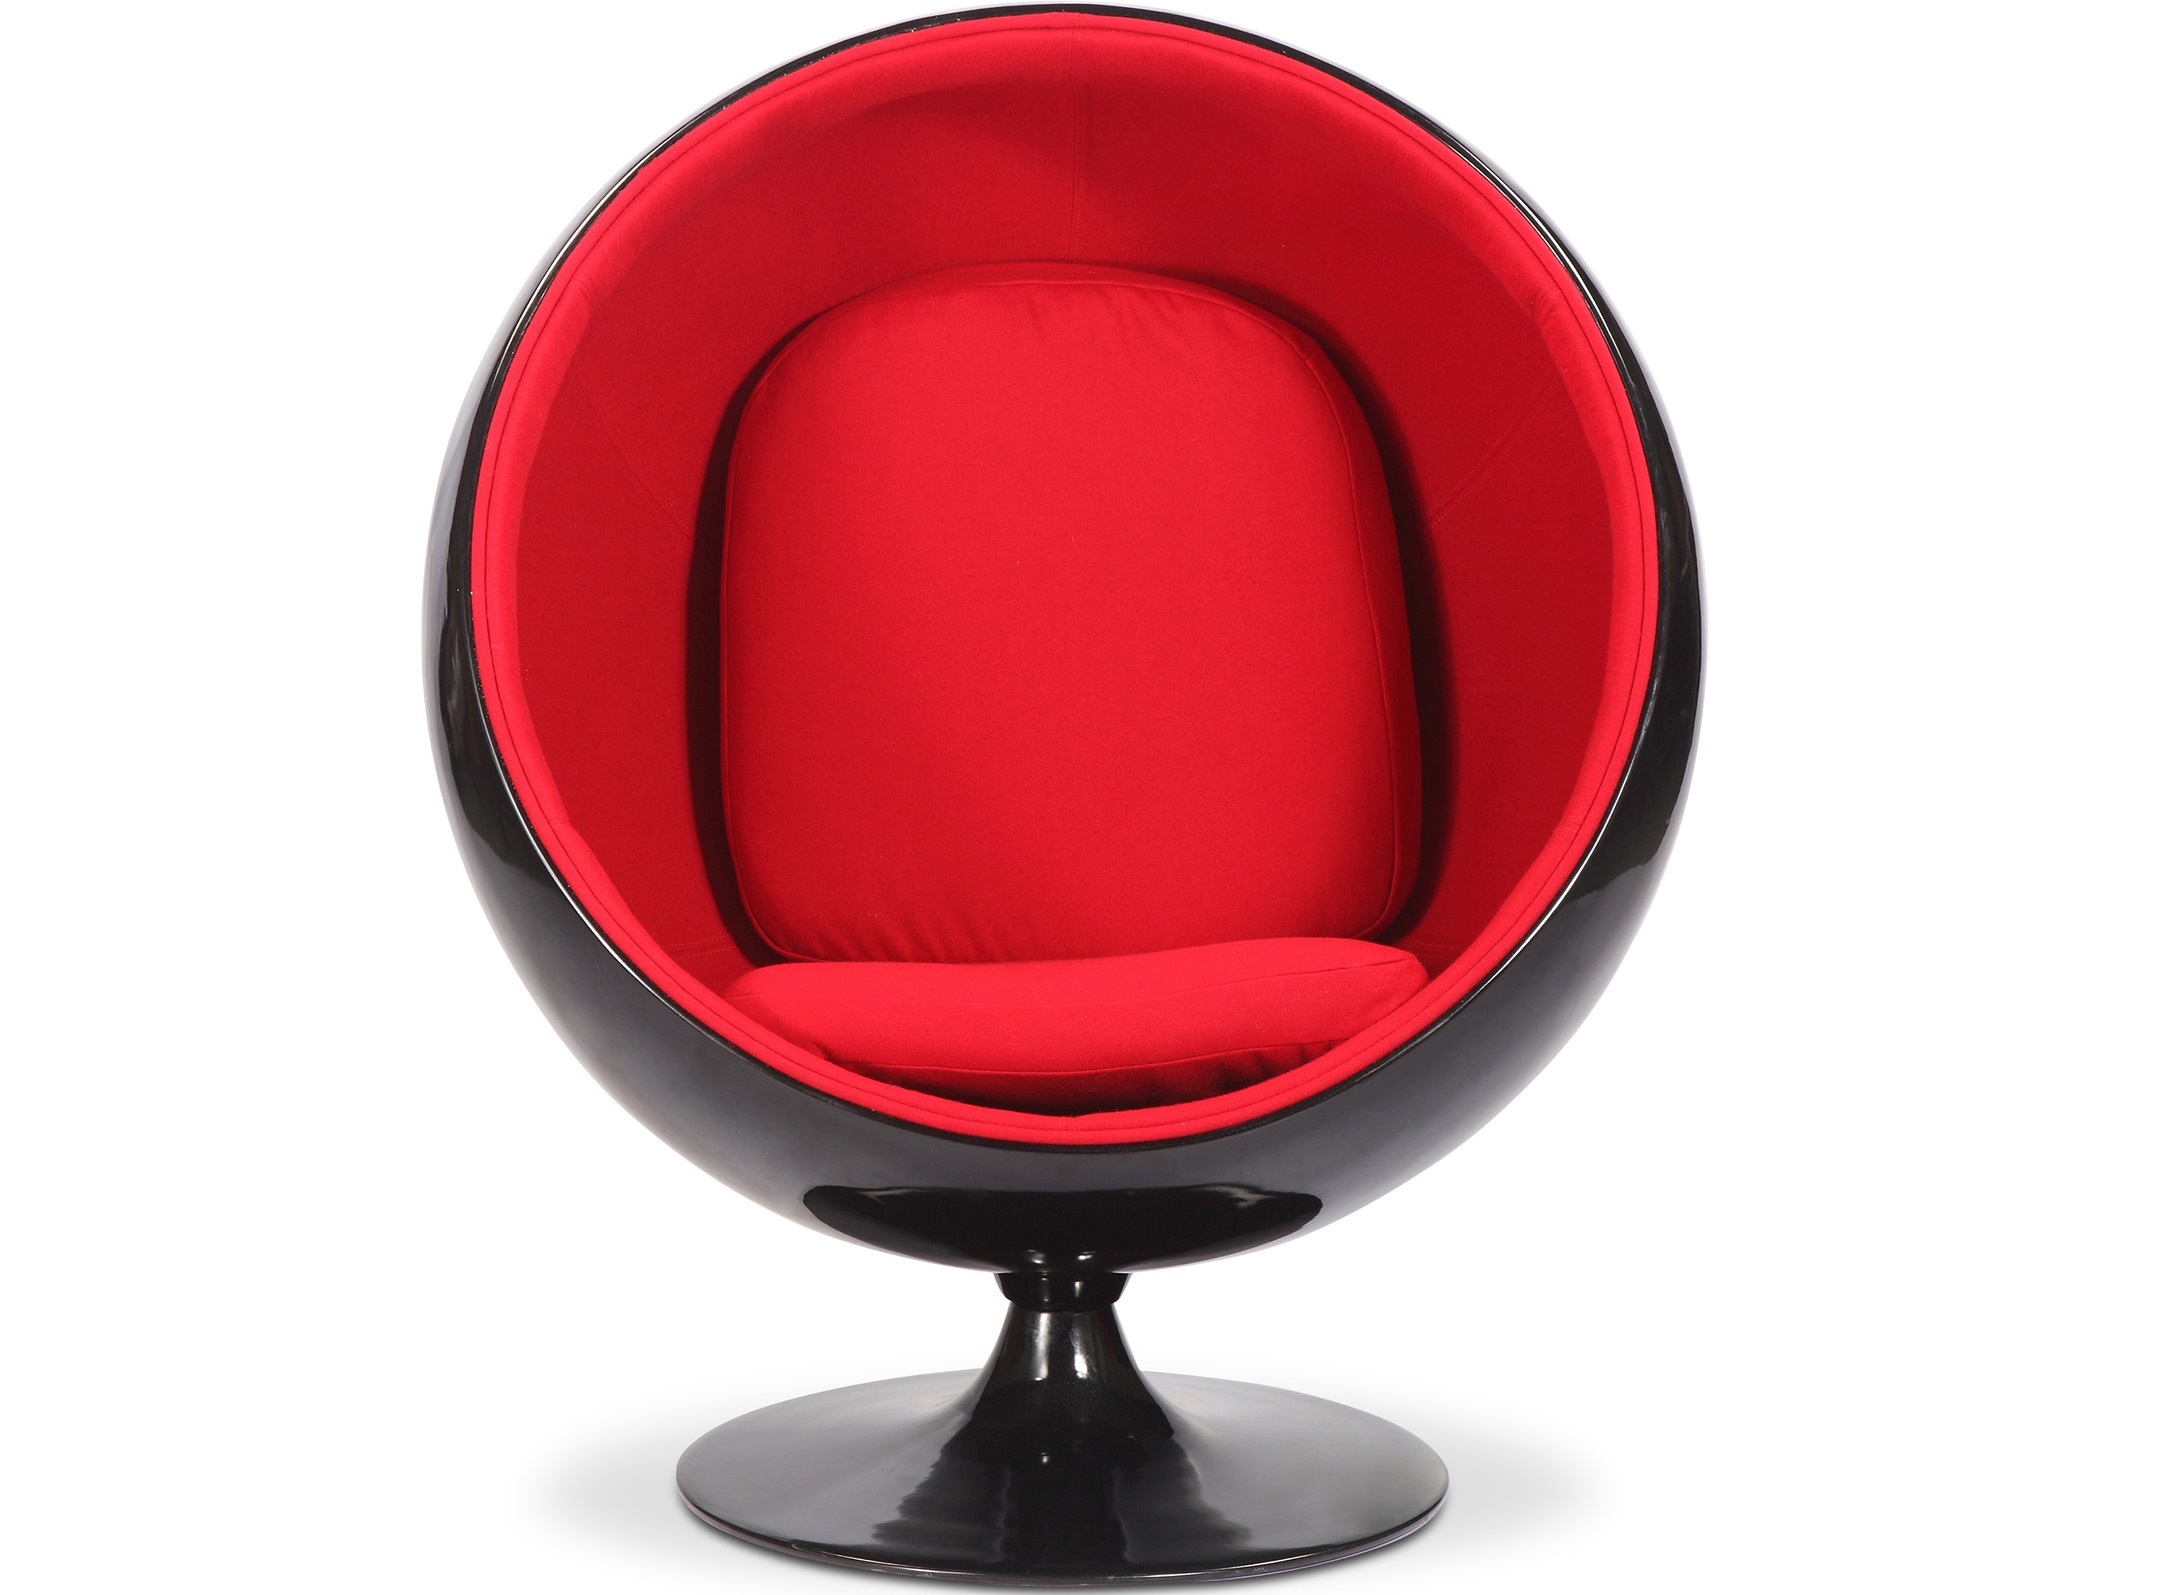 BALL CHAIR Designed by Eero Aarnio in 1963 (970x1090x1200)mm 40 kgs Price: 12.000.000 VND